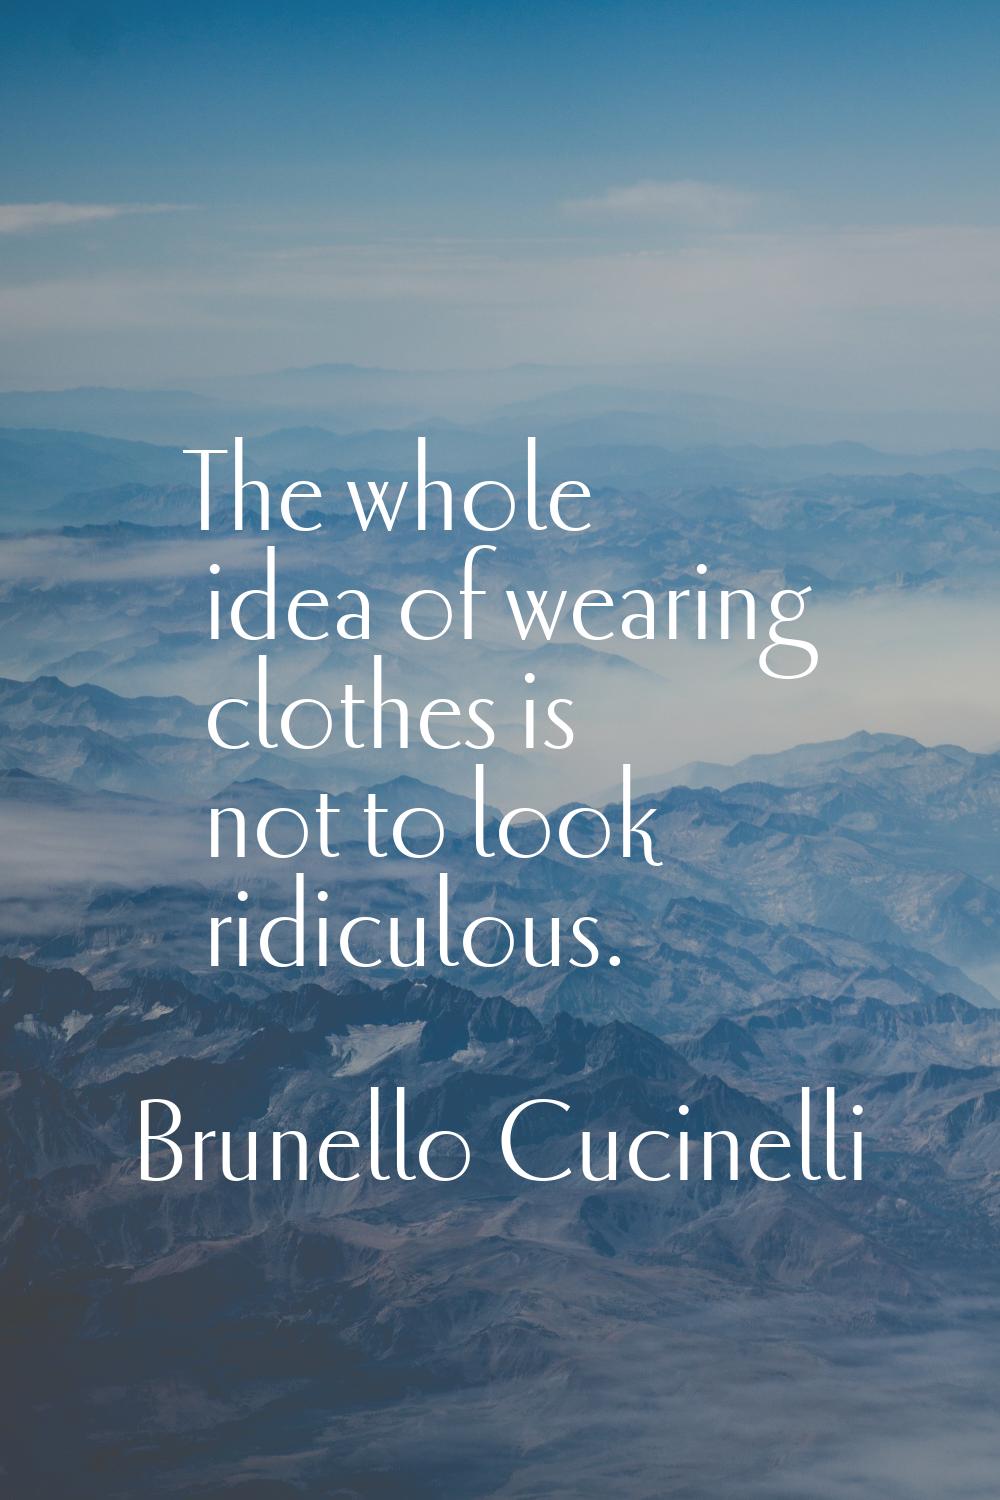 The whole idea of wearing clothes is not to look ridiculous.